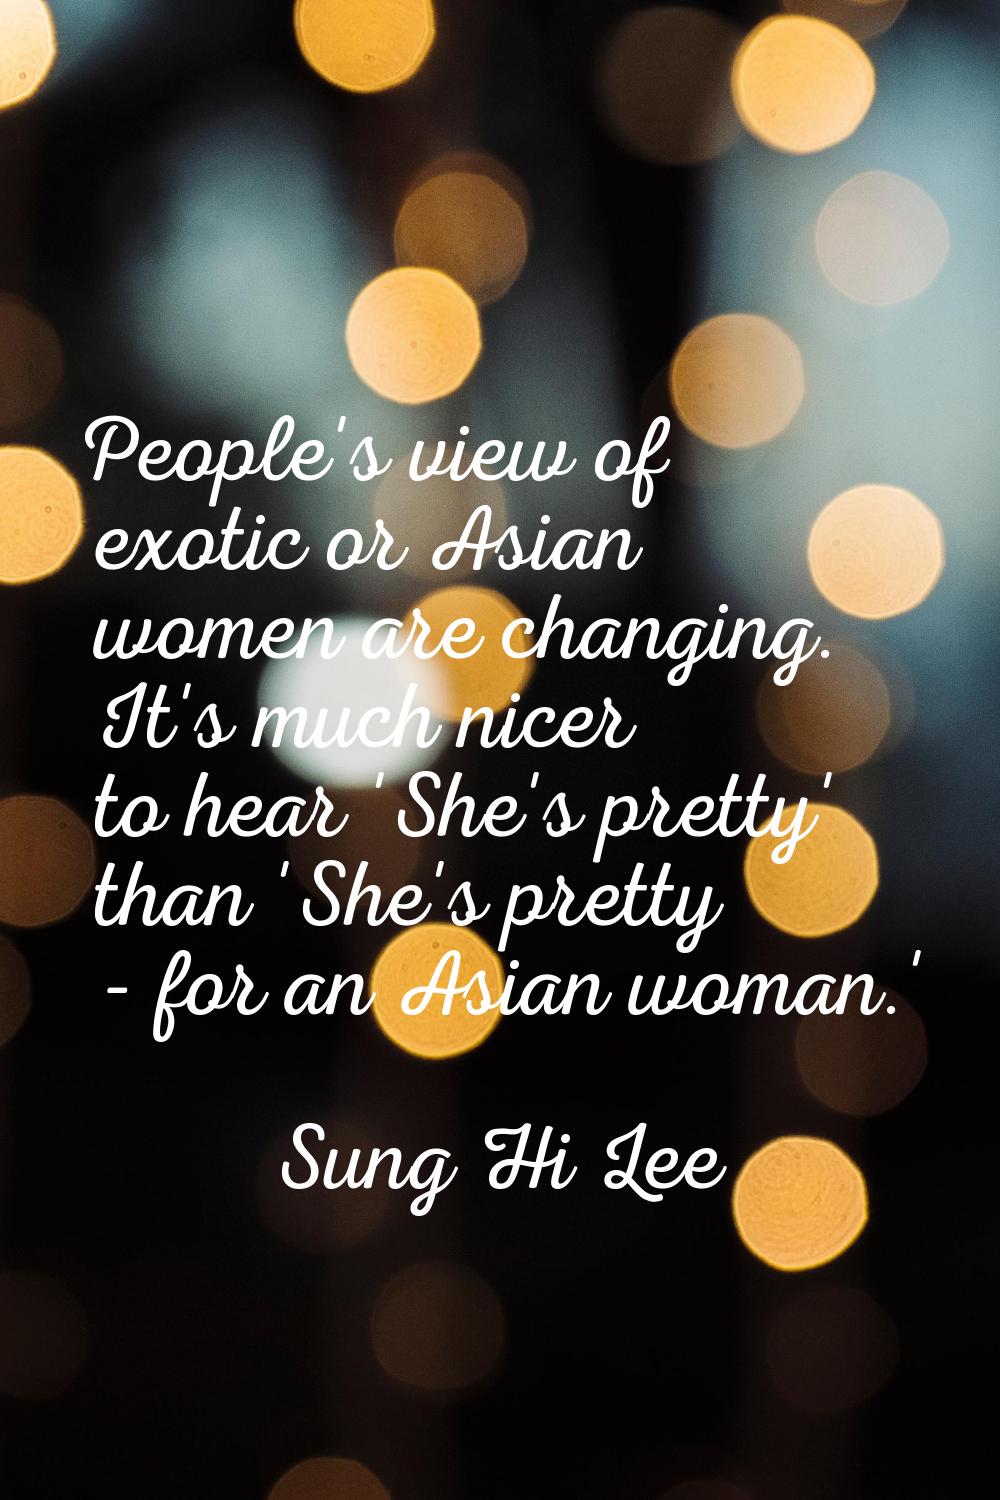 People's view of exotic or Asian women are changing. It's much nicer to hear 'She's pretty' than 'S